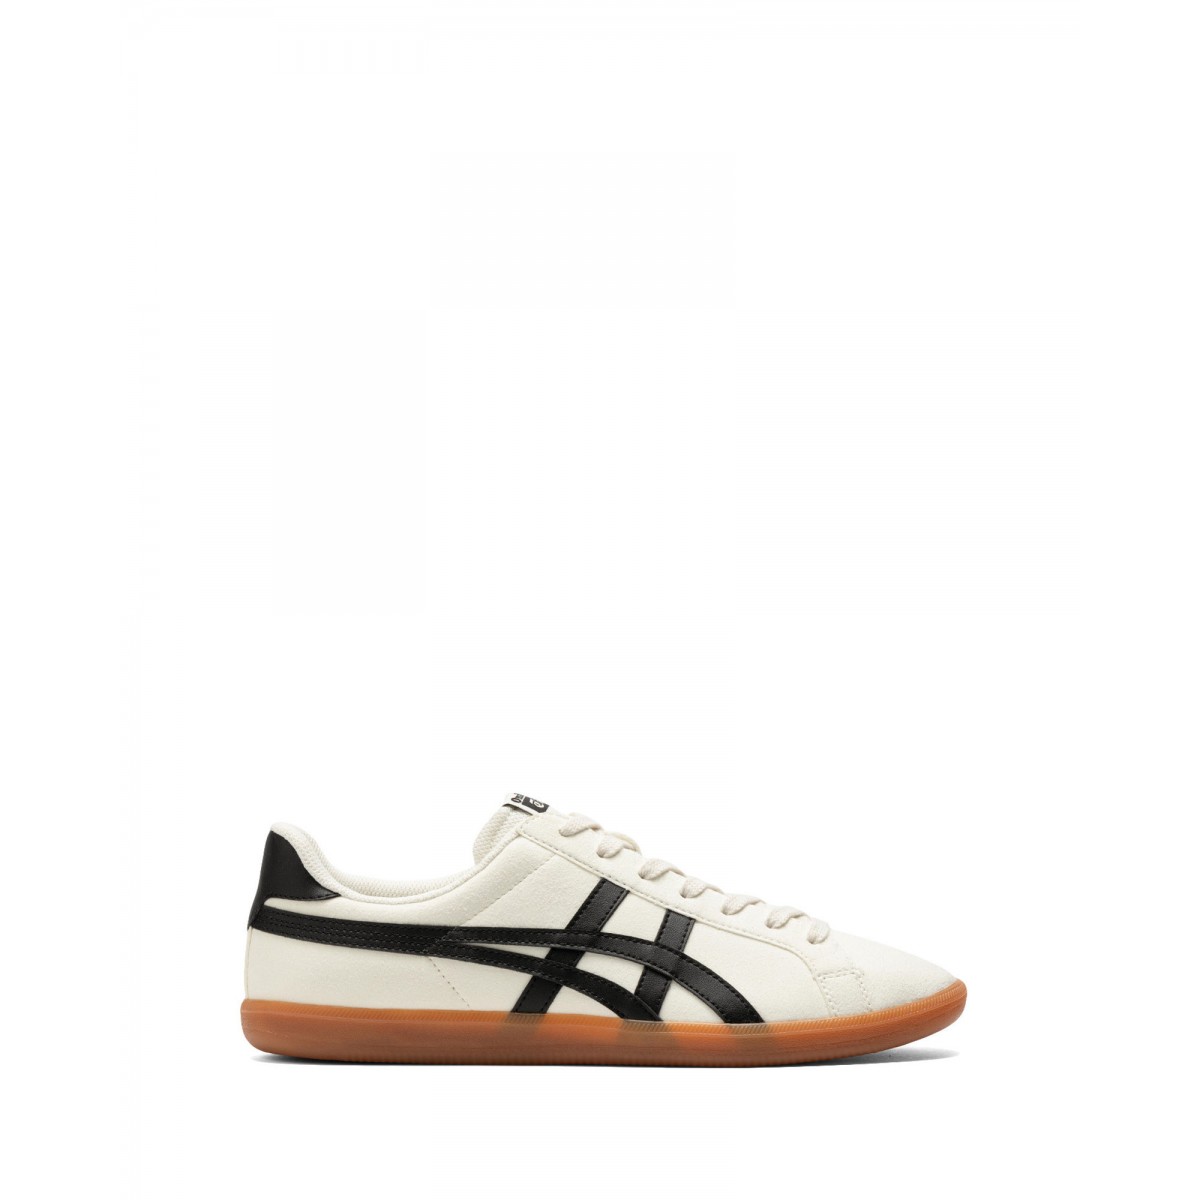 Onitsuka Tiger Sneakers Unisex DD Trainer Cream and Black